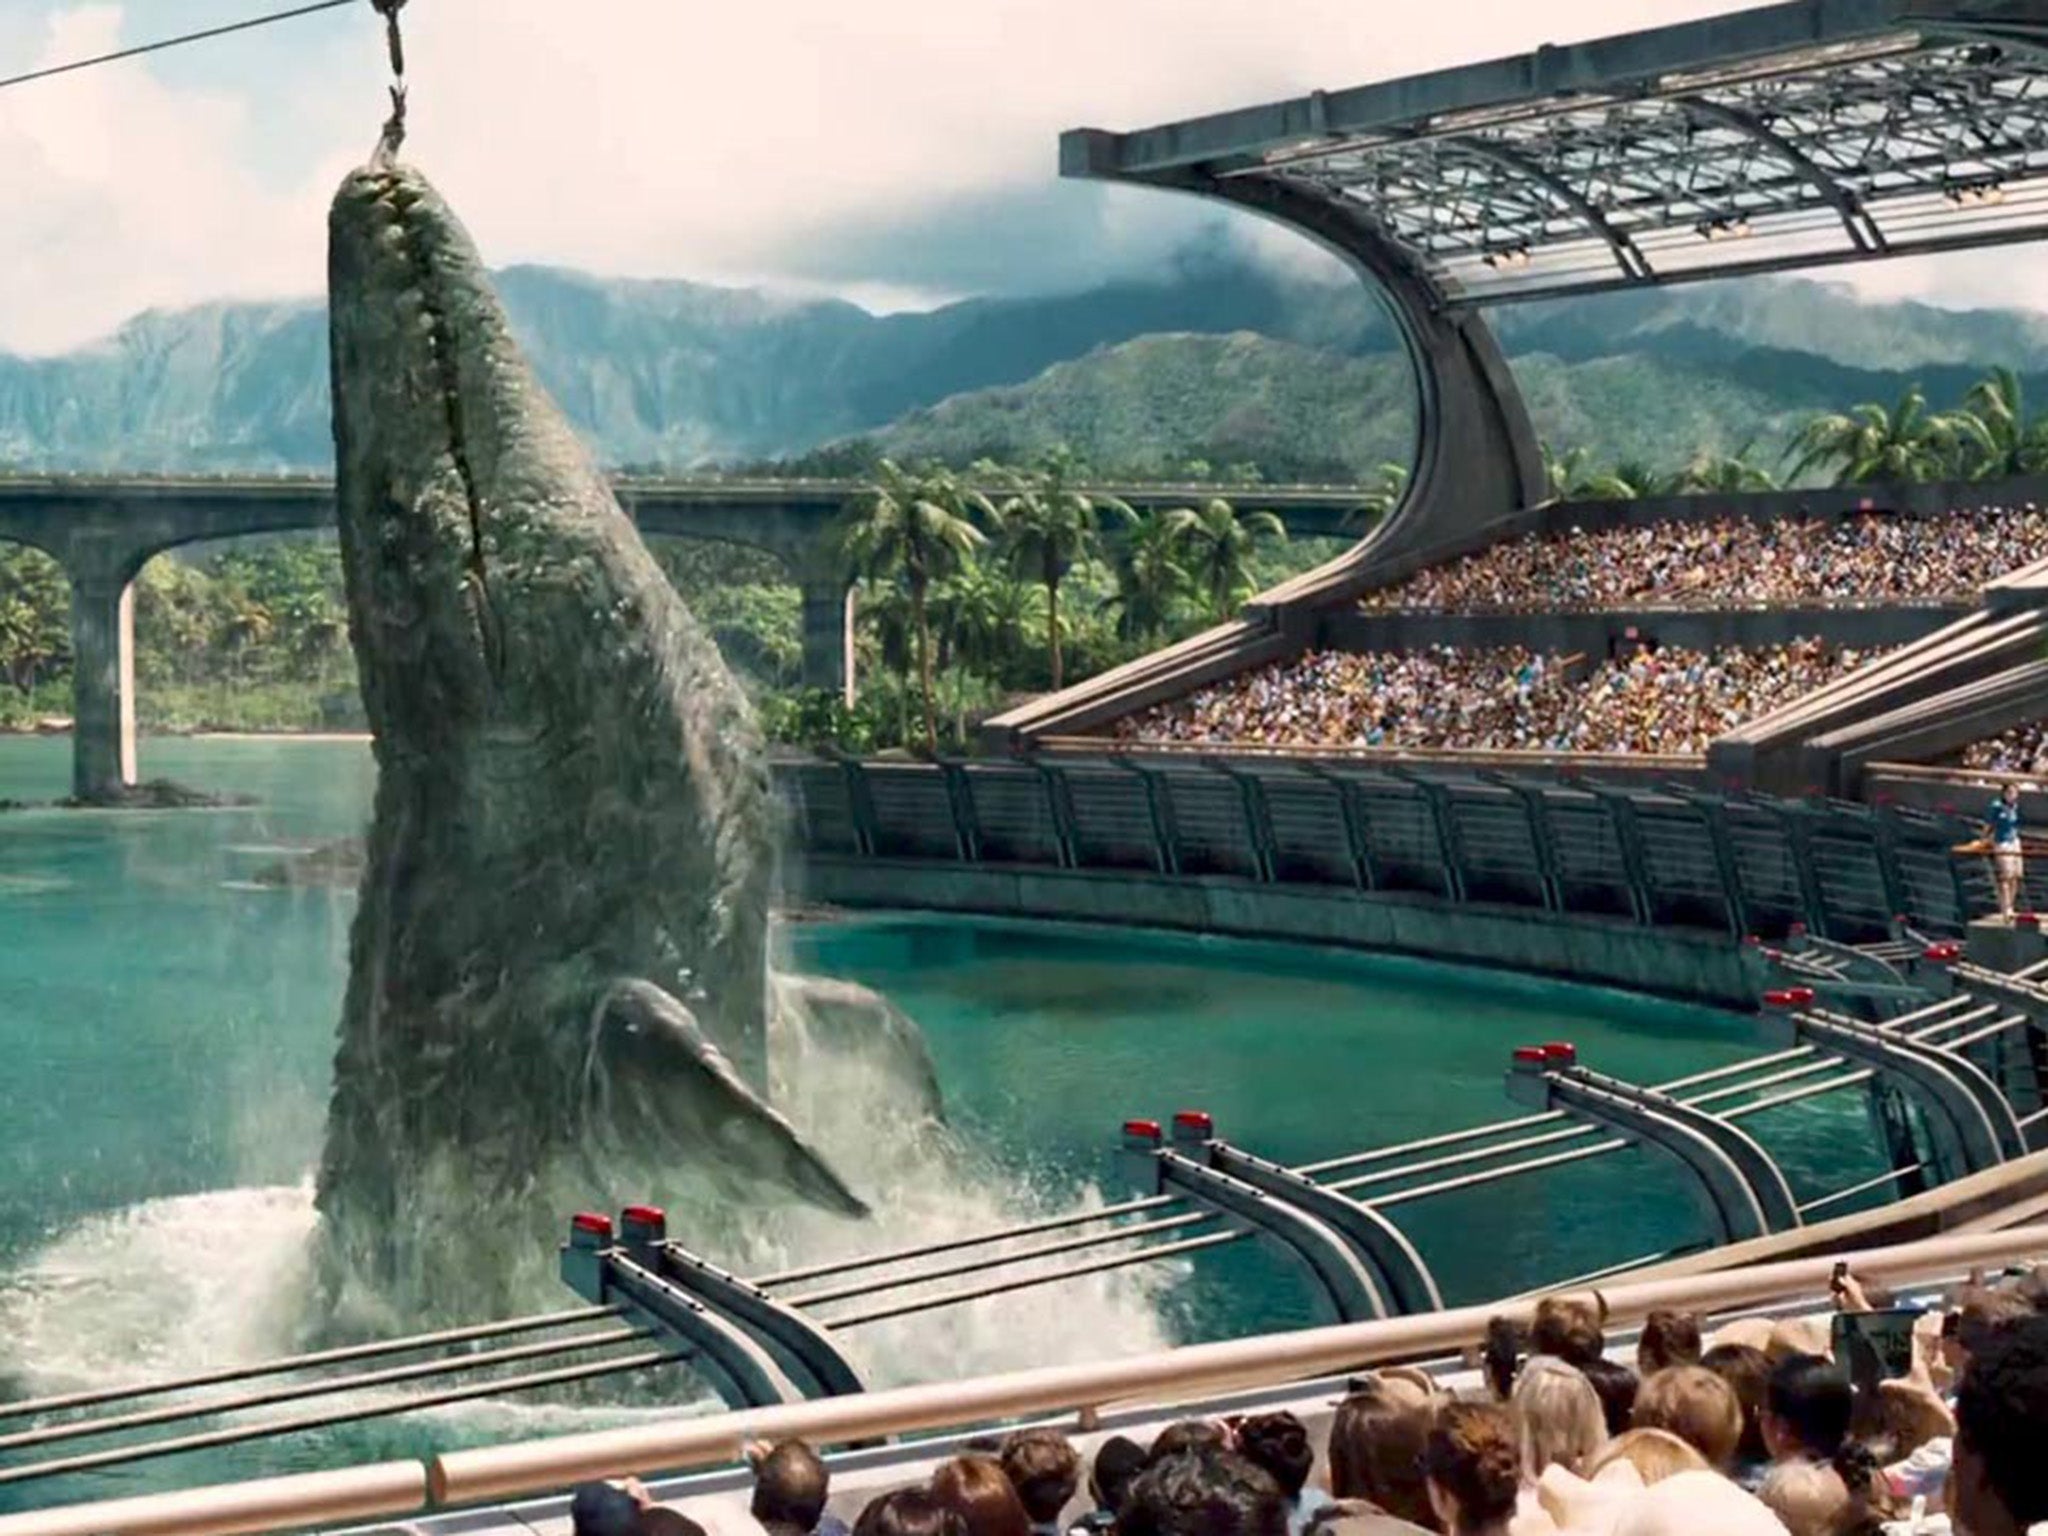 Jurassic World could beat Avatar to become the highest-grossing film of all-time